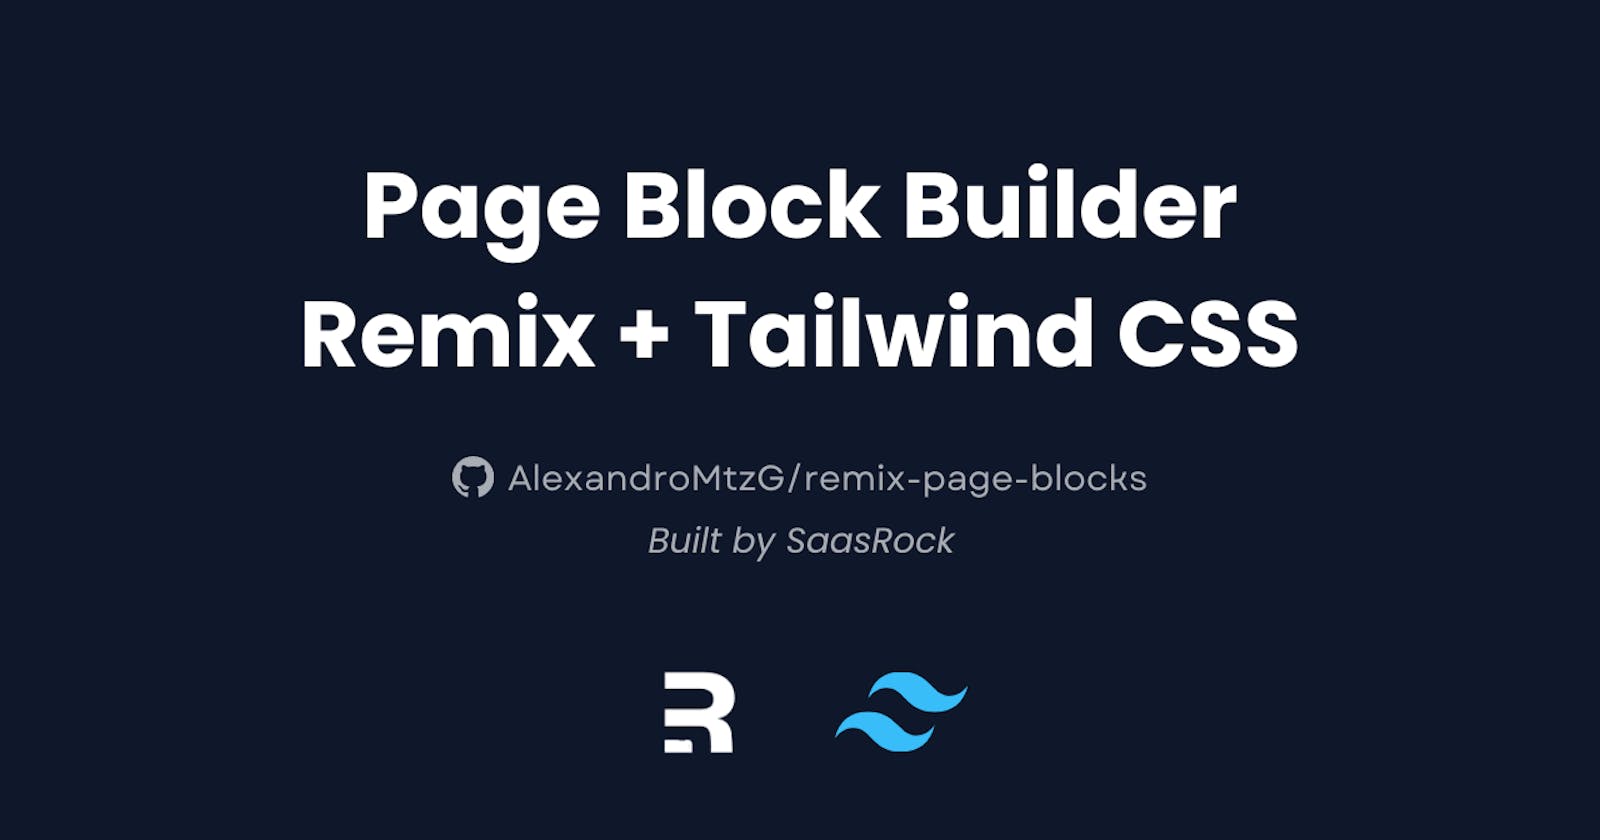 Open-source Page Block Builder with Remix and Tailwind CSS